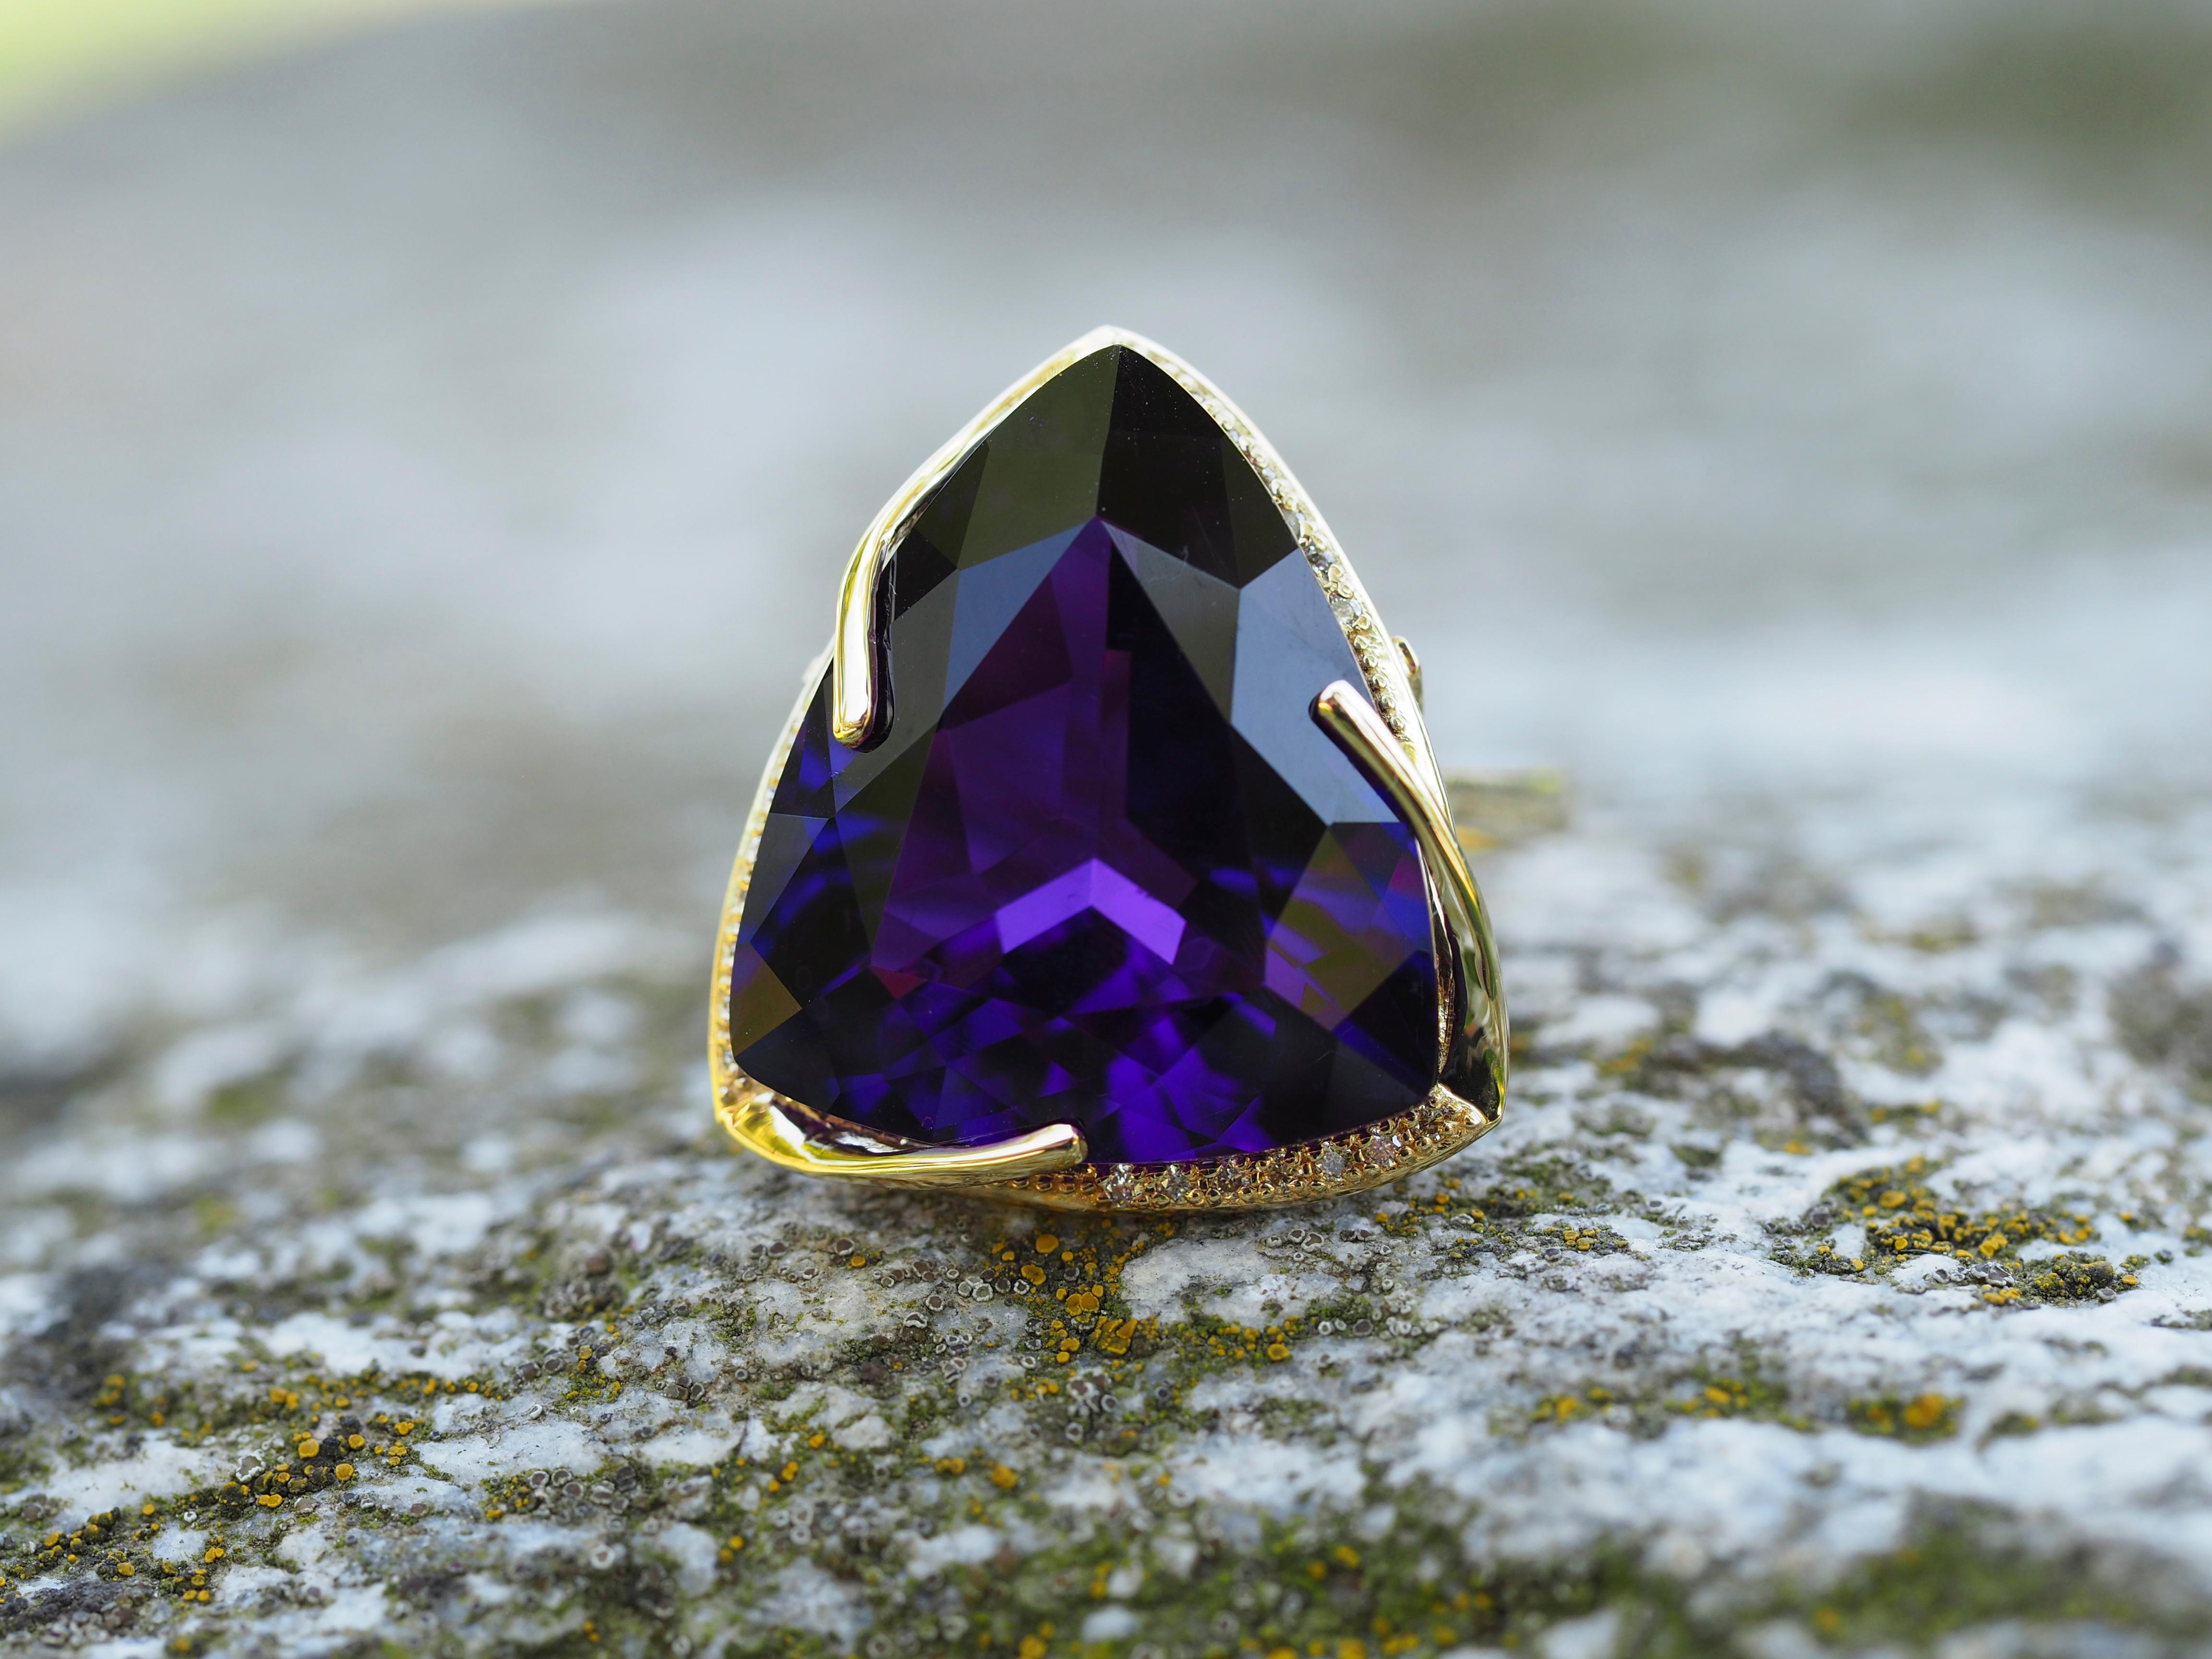 14 Karat Gold Ring with Amethyst and Diamonds, Amethyst Cocktail Ring 3